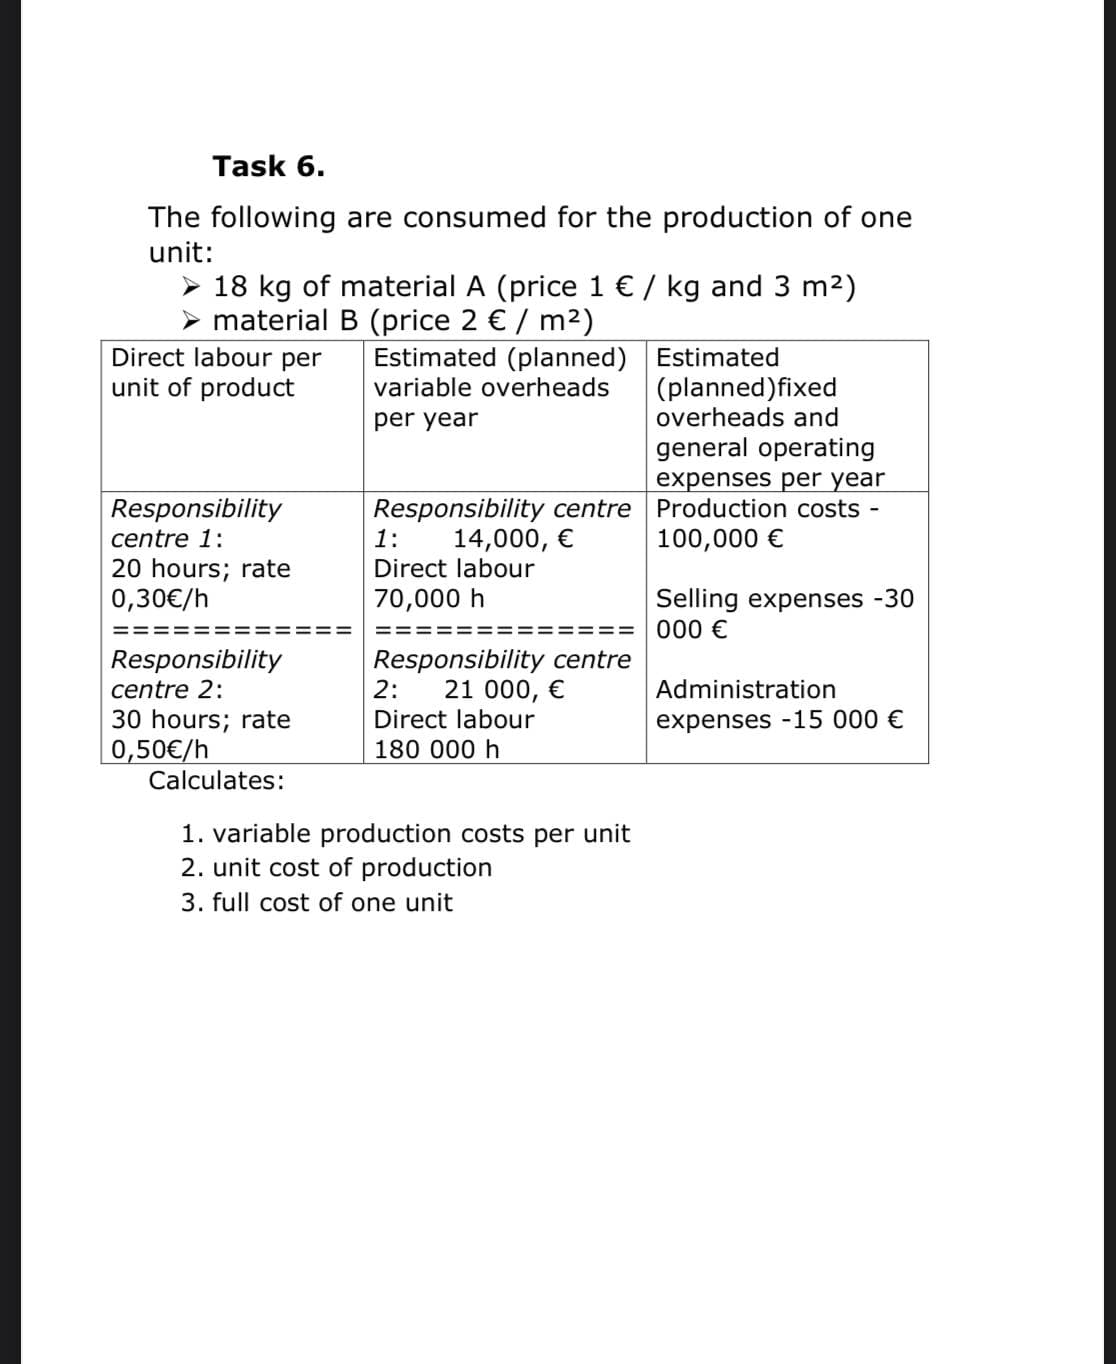 Task 6.
The following are consumed for the production of one
unit:
➤ 18 kg of material A (price 1 € / kg and 3 m²)
material B (price 2 € / m²)
Direct labour per
unit of product
Estimated (planned)
variable overheads
per year
Responsibility centre
14,000, €
1:
Direct labour
70,000 h
=====
=====
Responsibility centre
21 000, €
Responsibility
centre 1:
20 hours; rate
0,30€/h
Responsibility
centre 2:
30 hours; rate
0,50€/h
Calculates:
1. variable production costs per unit
2. unit cost of production
3. full cost of one unit
2:
Direct labour
180 000 h
Estimated
(planned)fixed
overheads and
general operating
expenses per year
Production costs -
100,000 €
Selling expenses -30
000 €
Administration
expenses -15 000 €